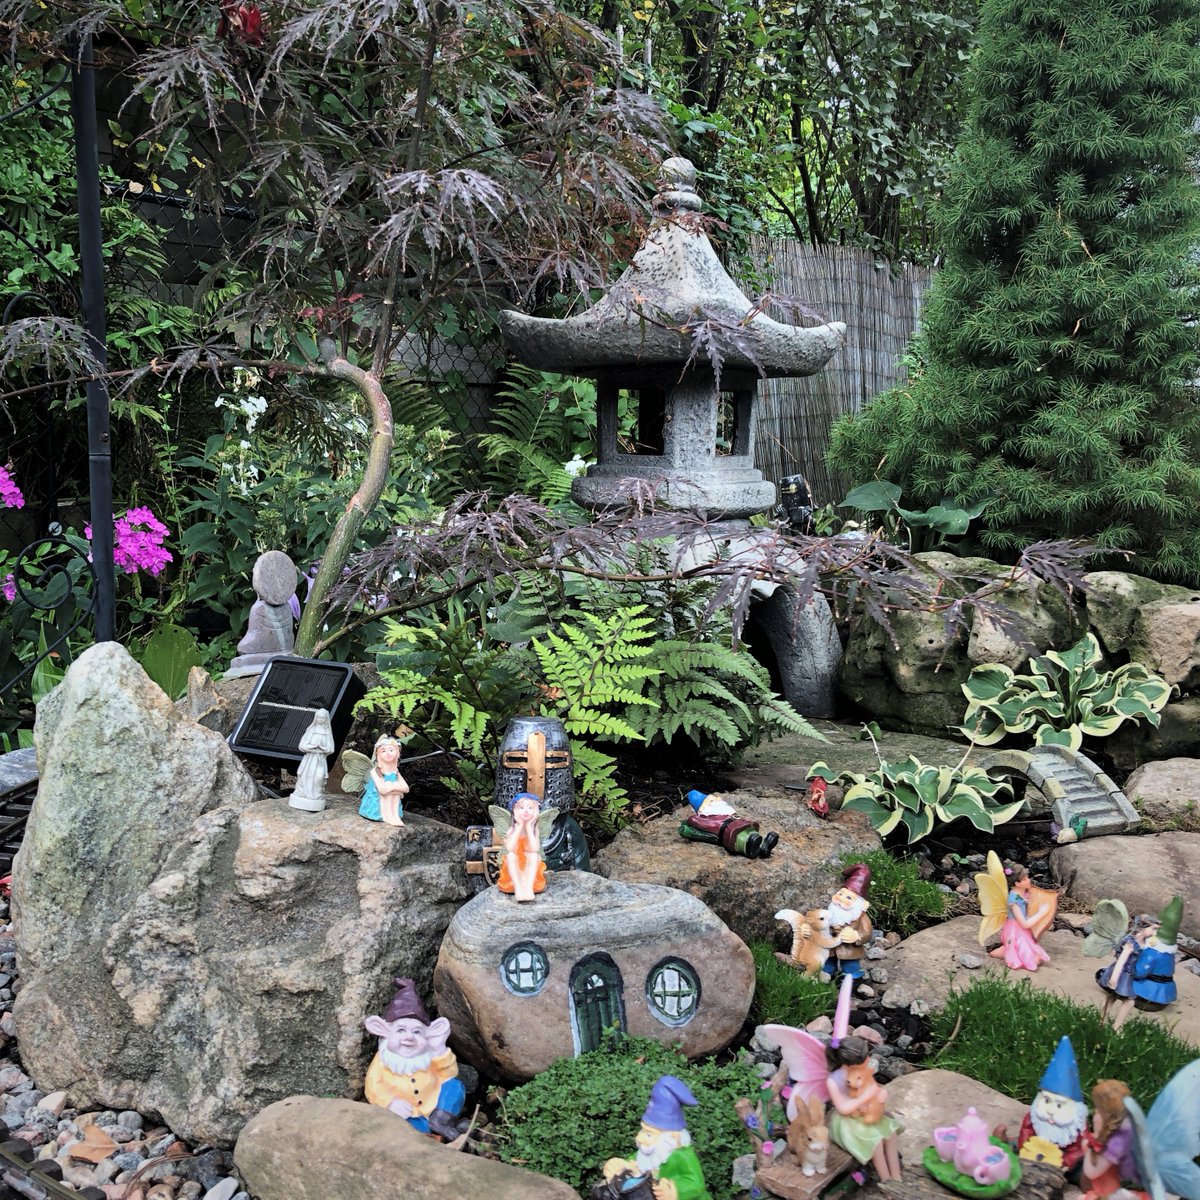 Good morning from Toronto on this #FairyFriday! This part of the Fairy Garden looks quite Zen! 

#Fairy #FairyGarden #Gnome #GnomeGarden #ZenGarden #FridayFairy